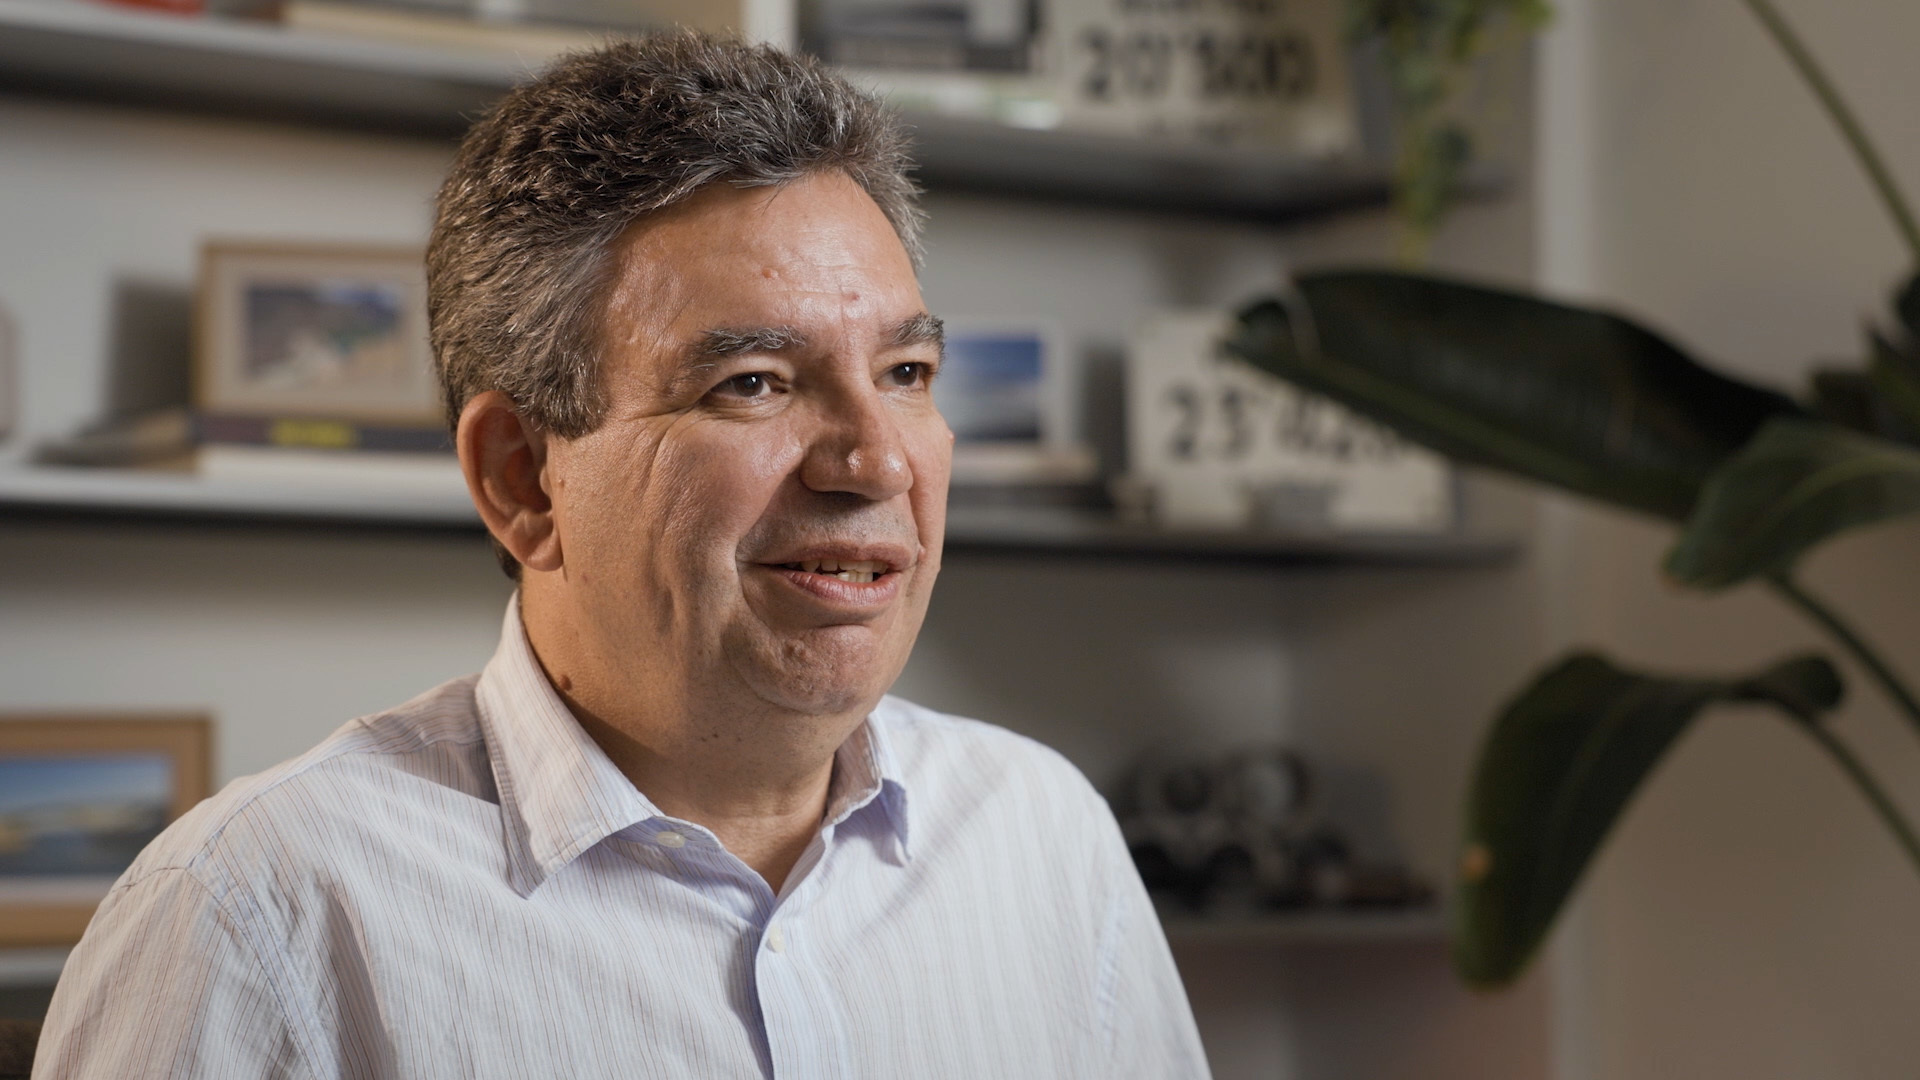 "Collaboration in Lombardi begins when you enter in the morning, turn on your computer, and see a network of people connected and working towards a common goal."
Carlos Fernandez, CEO Lombardi Latinoamérica